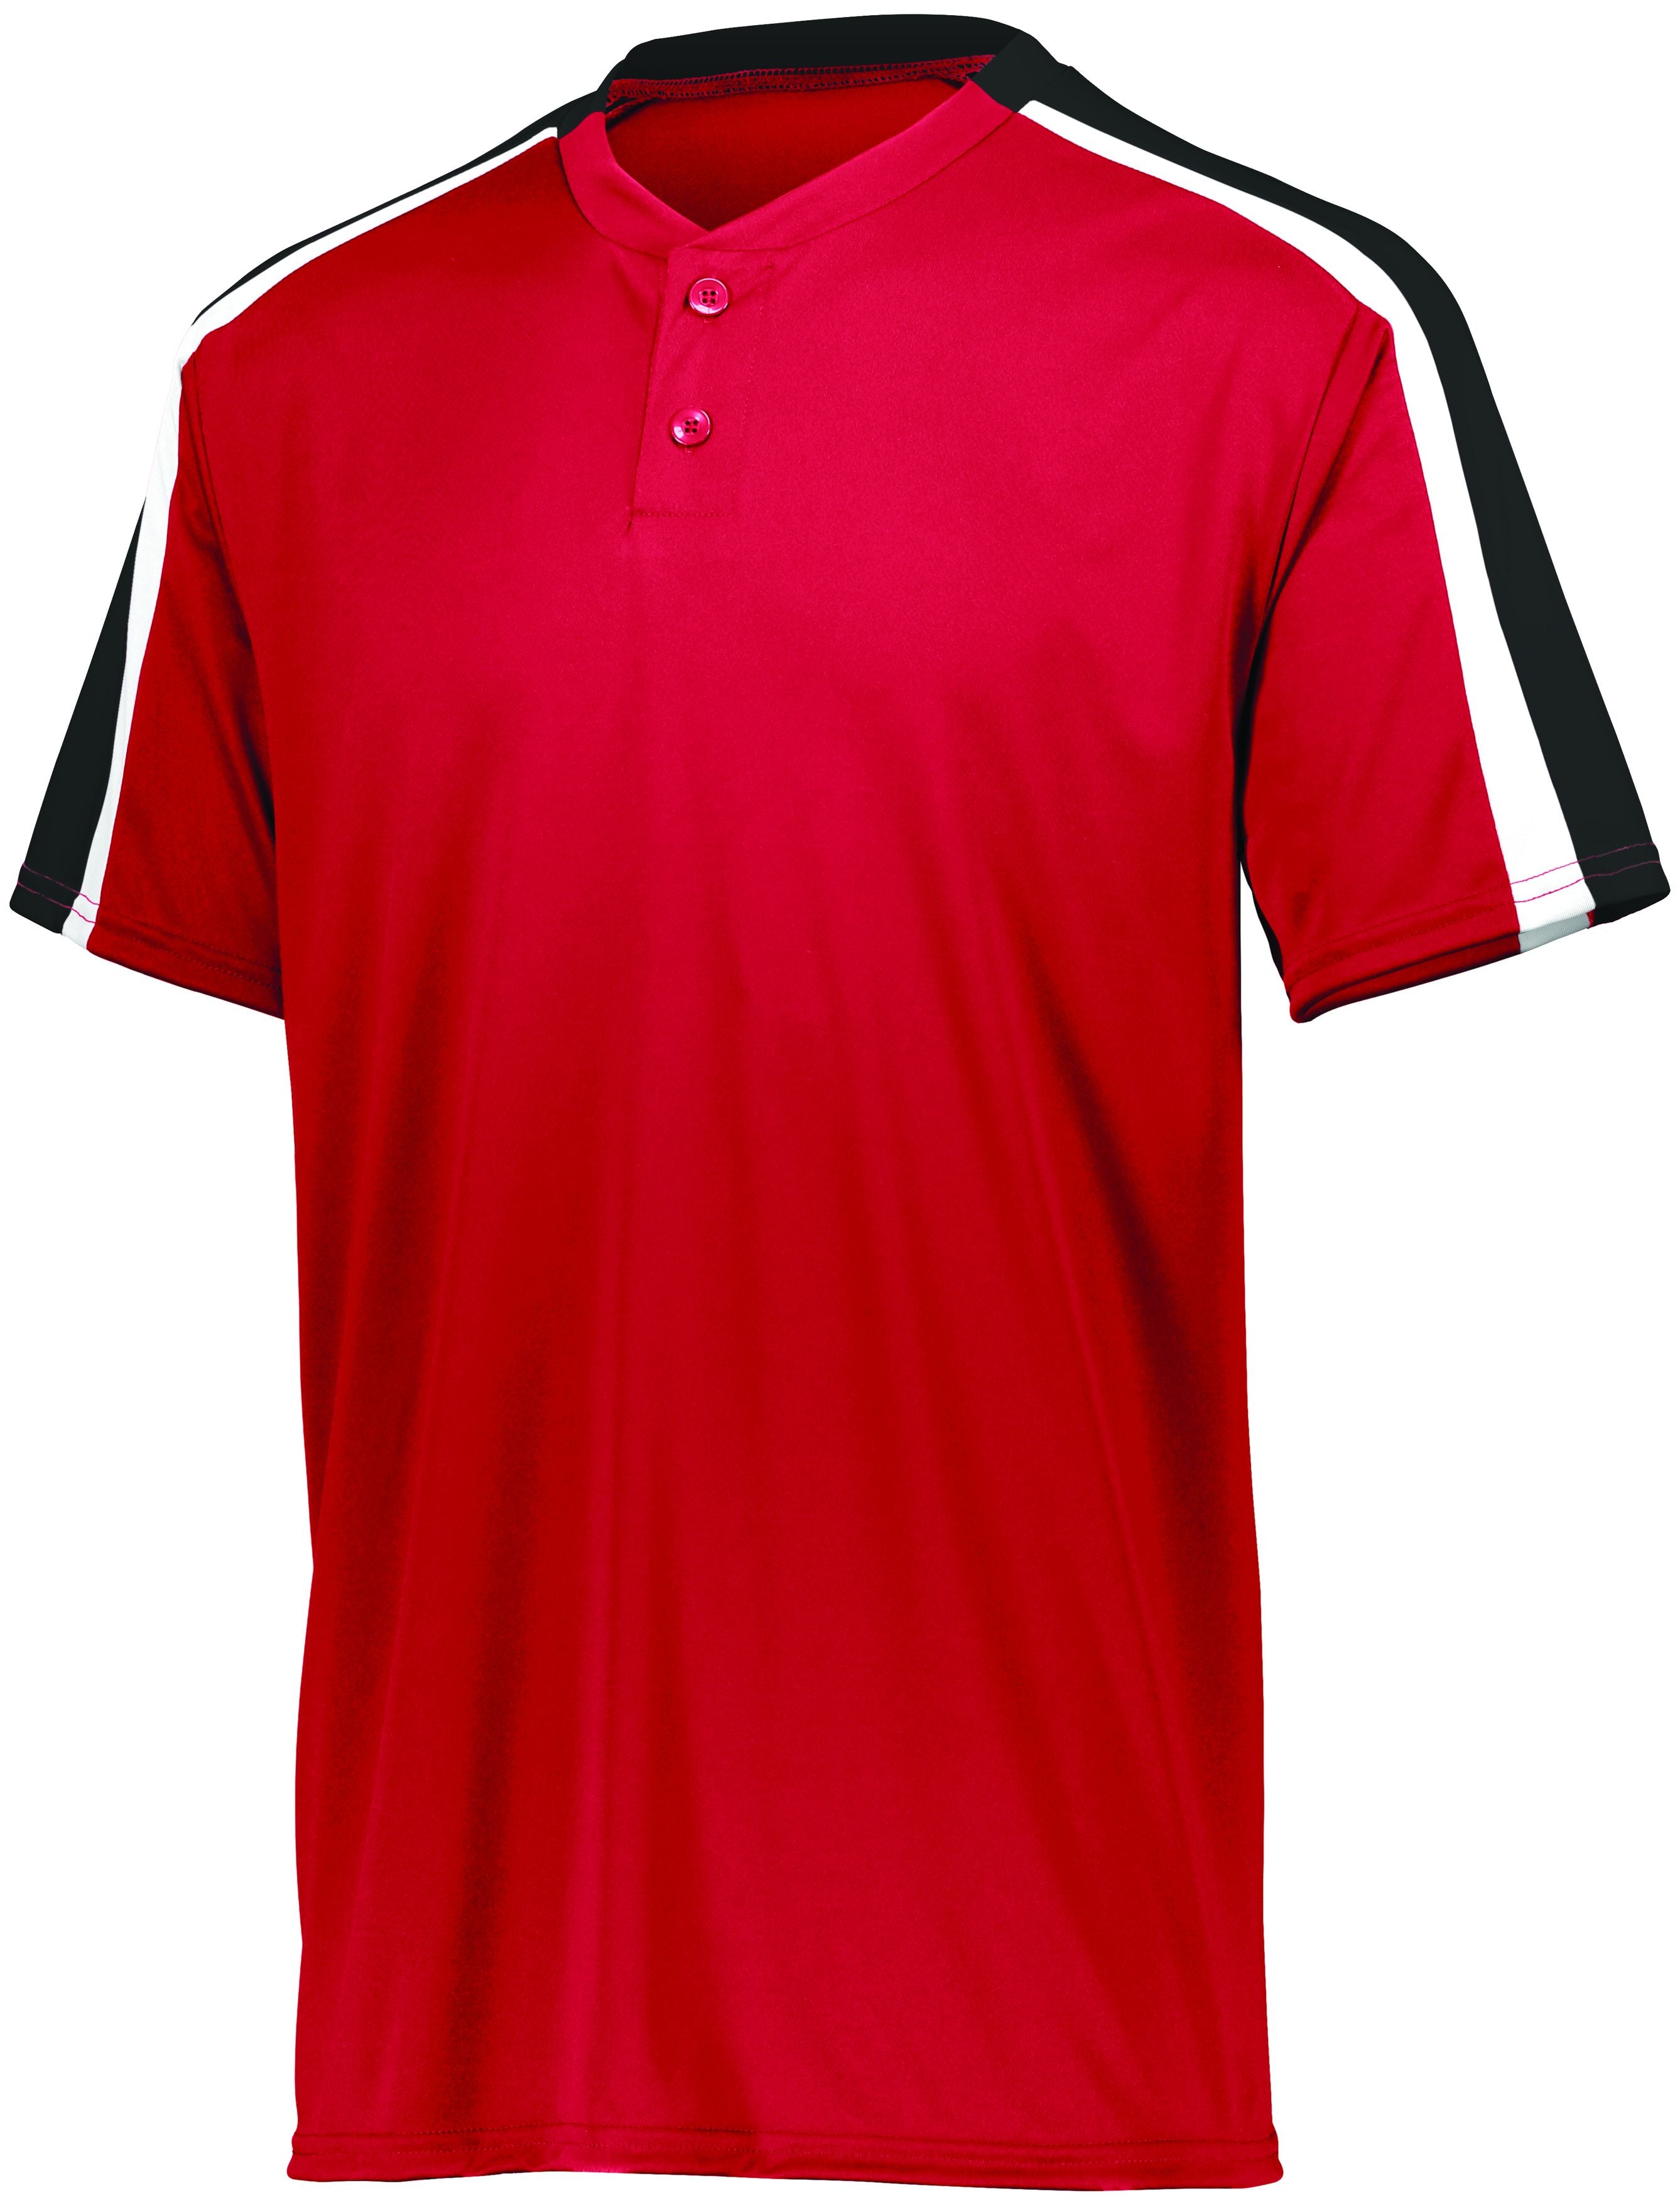 Augusta Sportswear Power Plus Jersey 2.0 in Red/Black/White  -Part of the Adult, Adult-Jersey, Augusta-Products, Baseball, Shirts, All-Sports, All-Sports-1 product lines at KanaleyCreations.com